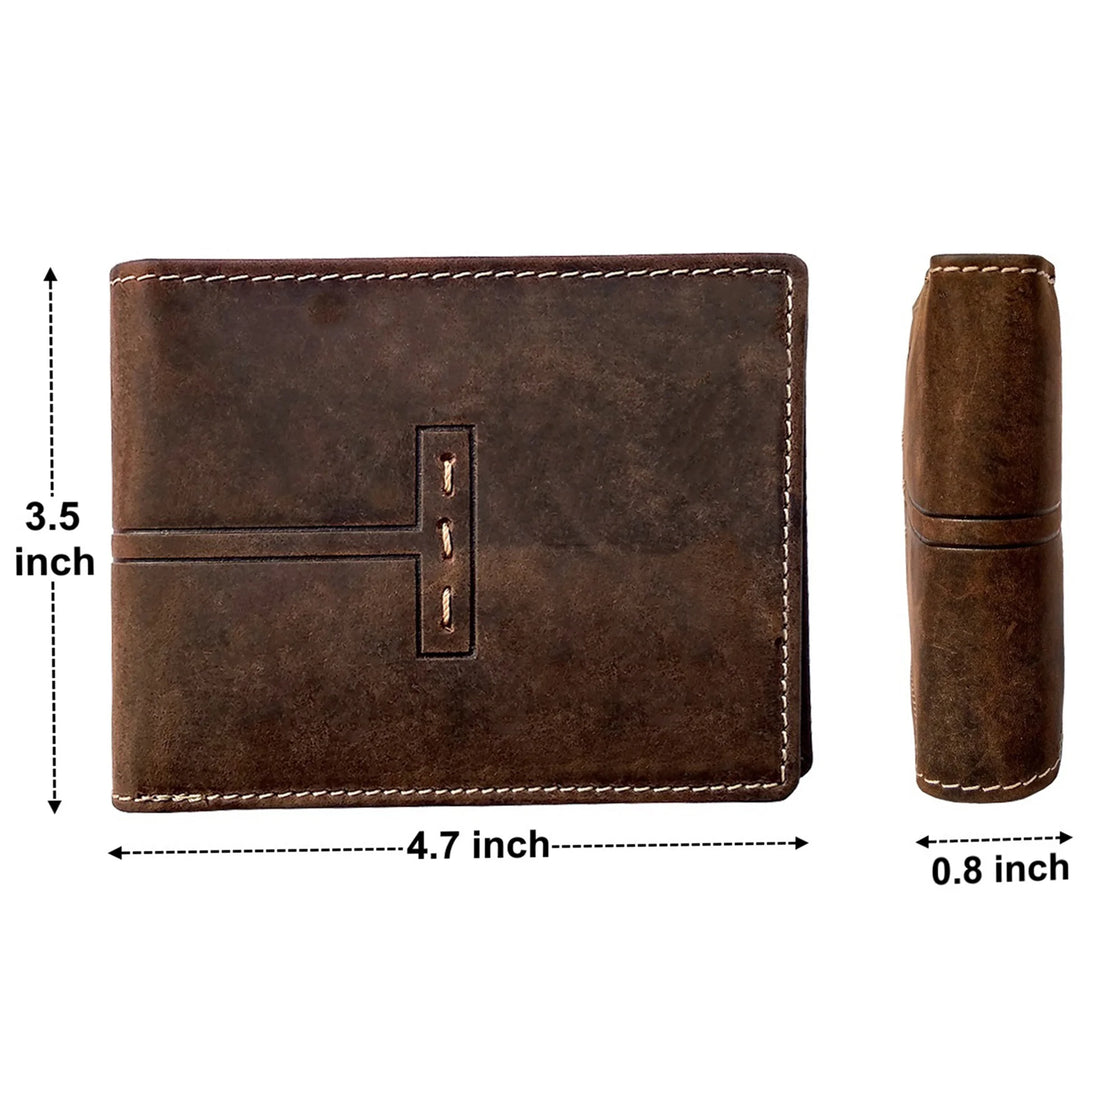 RFID Protected Leather Wallets for Men Bifold Wallet With Coin